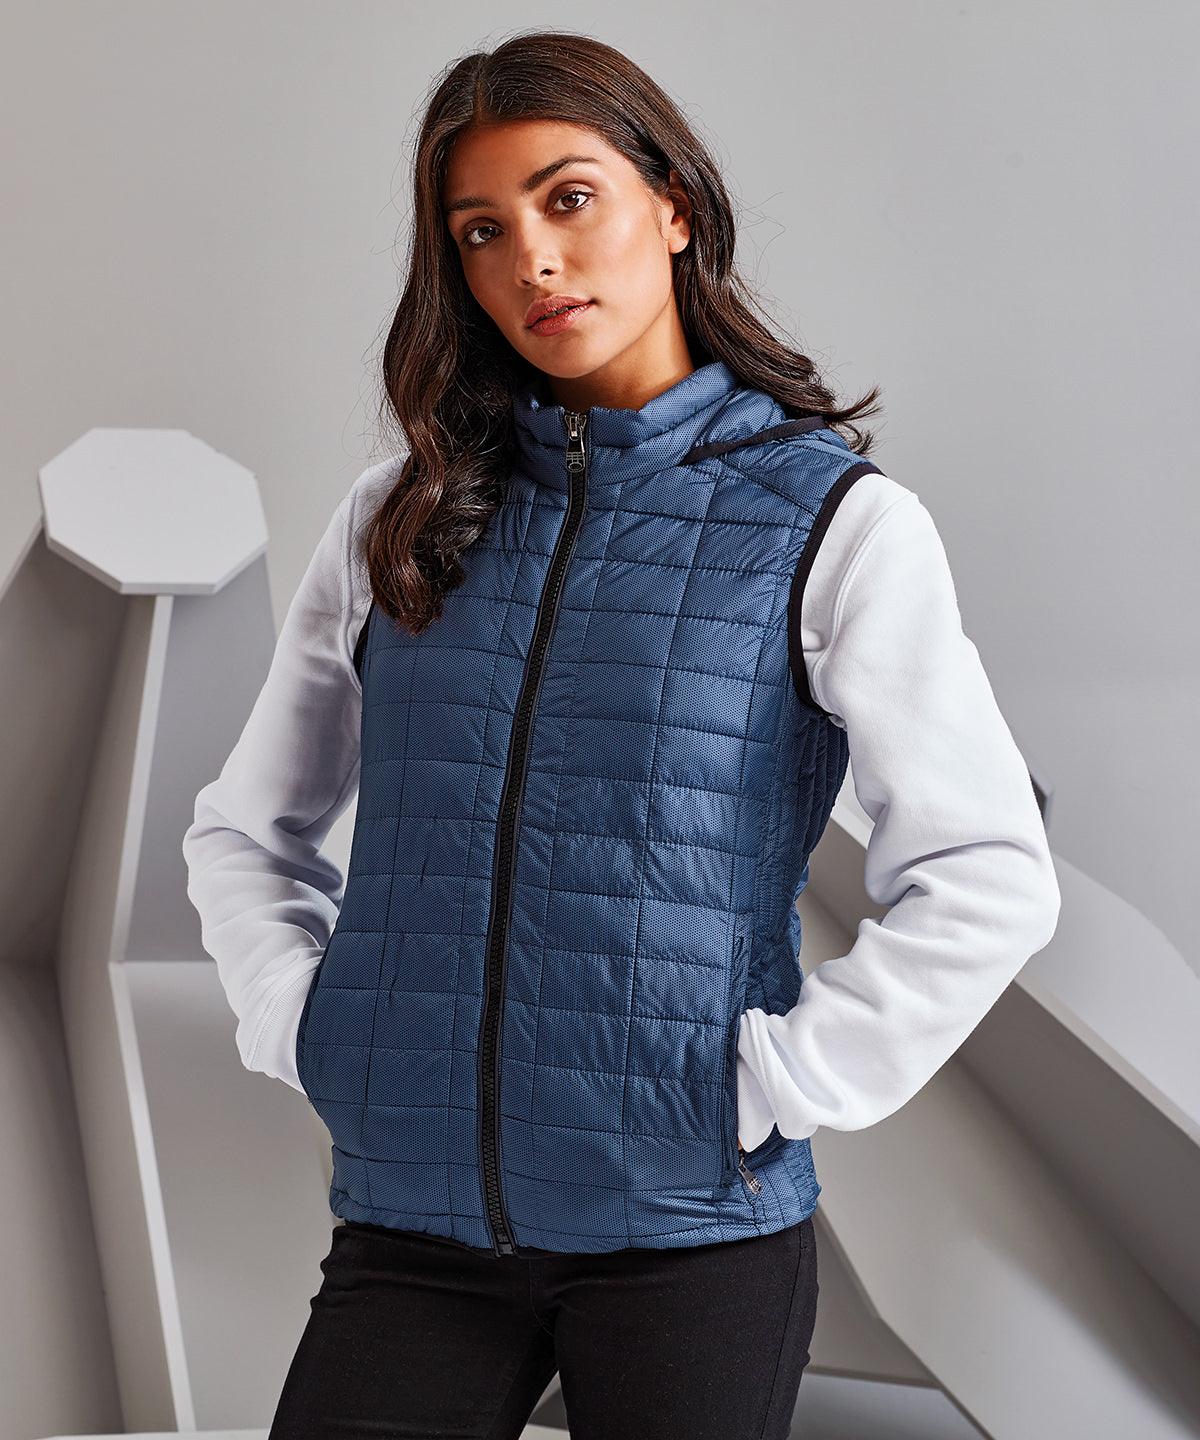 Mulberry - Women's honeycomb hooded gilet Body Warmers 2786 Gilets and Bodywarmers, Jackets & Coats, Padded & Insulation, Rebrandable, Women's Fashion Schoolwear Centres